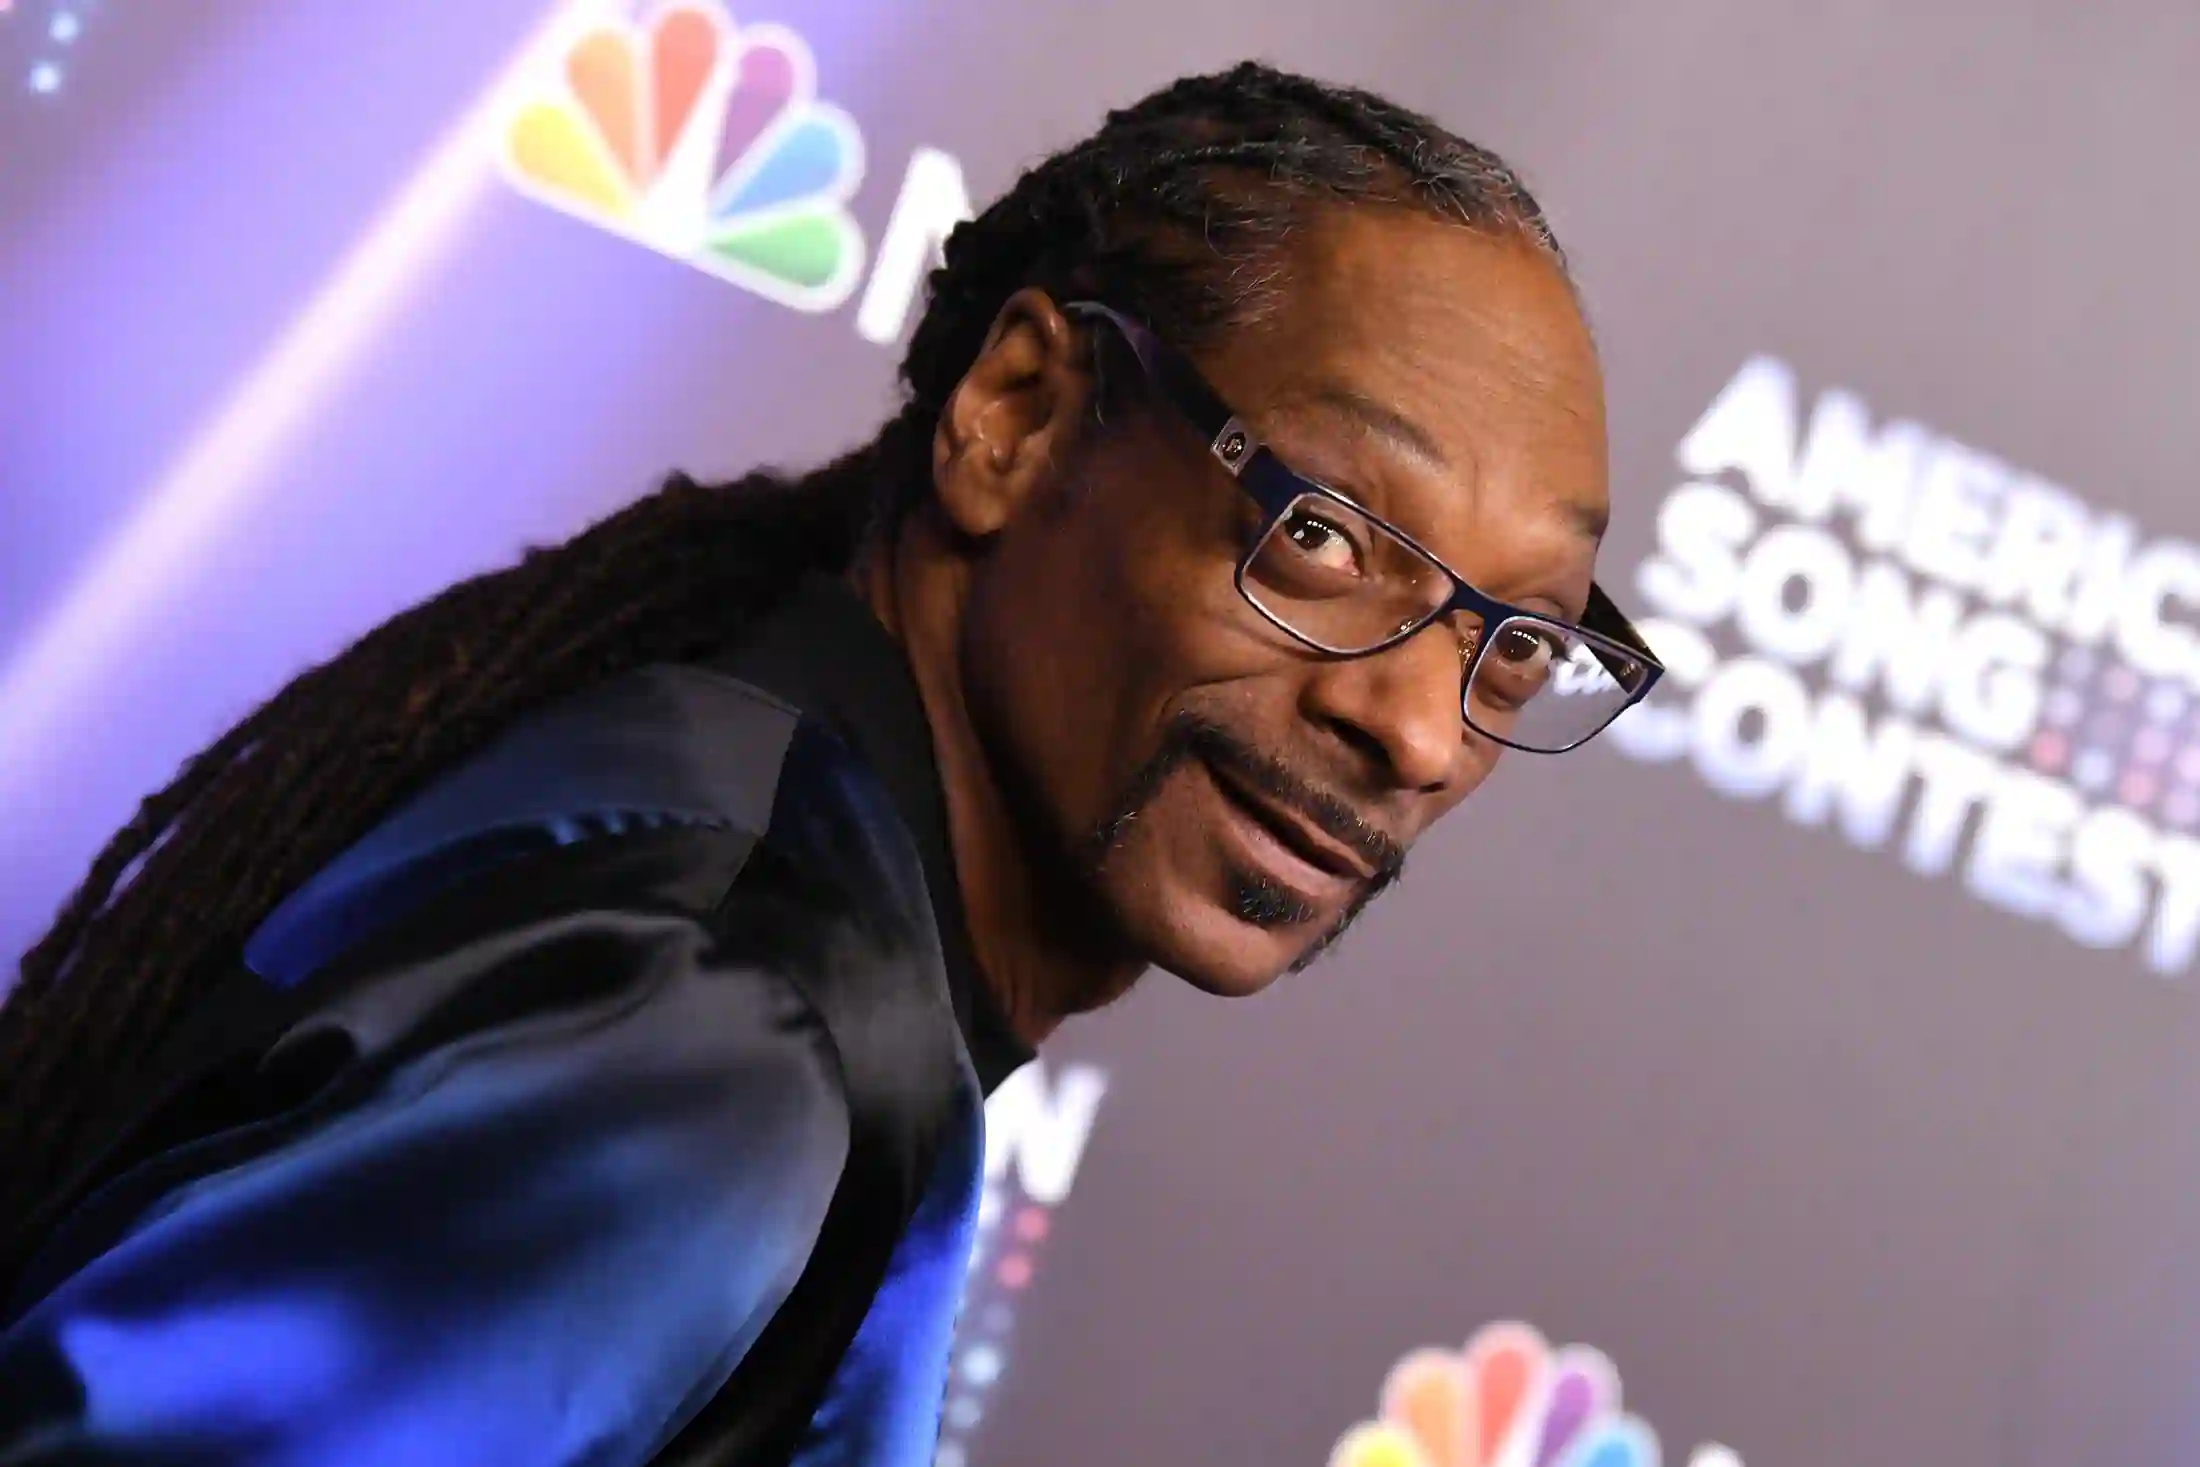 Snoop Dogg has released a new cereal brand called "Snoop Loops.